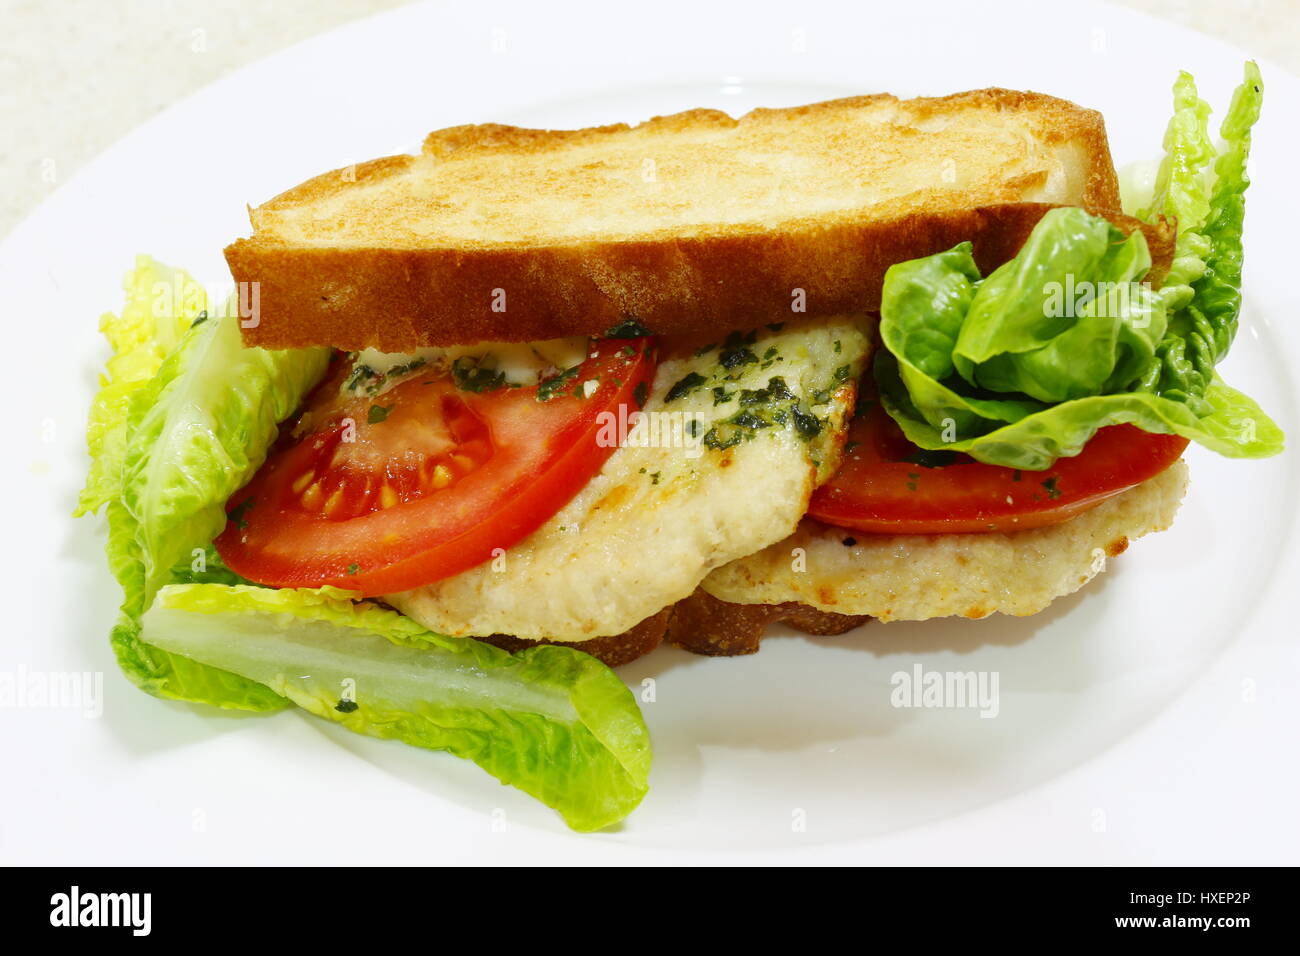 A homemade toasted chicken burger cum sandwich with tomato and lettuce salad Stock Photo